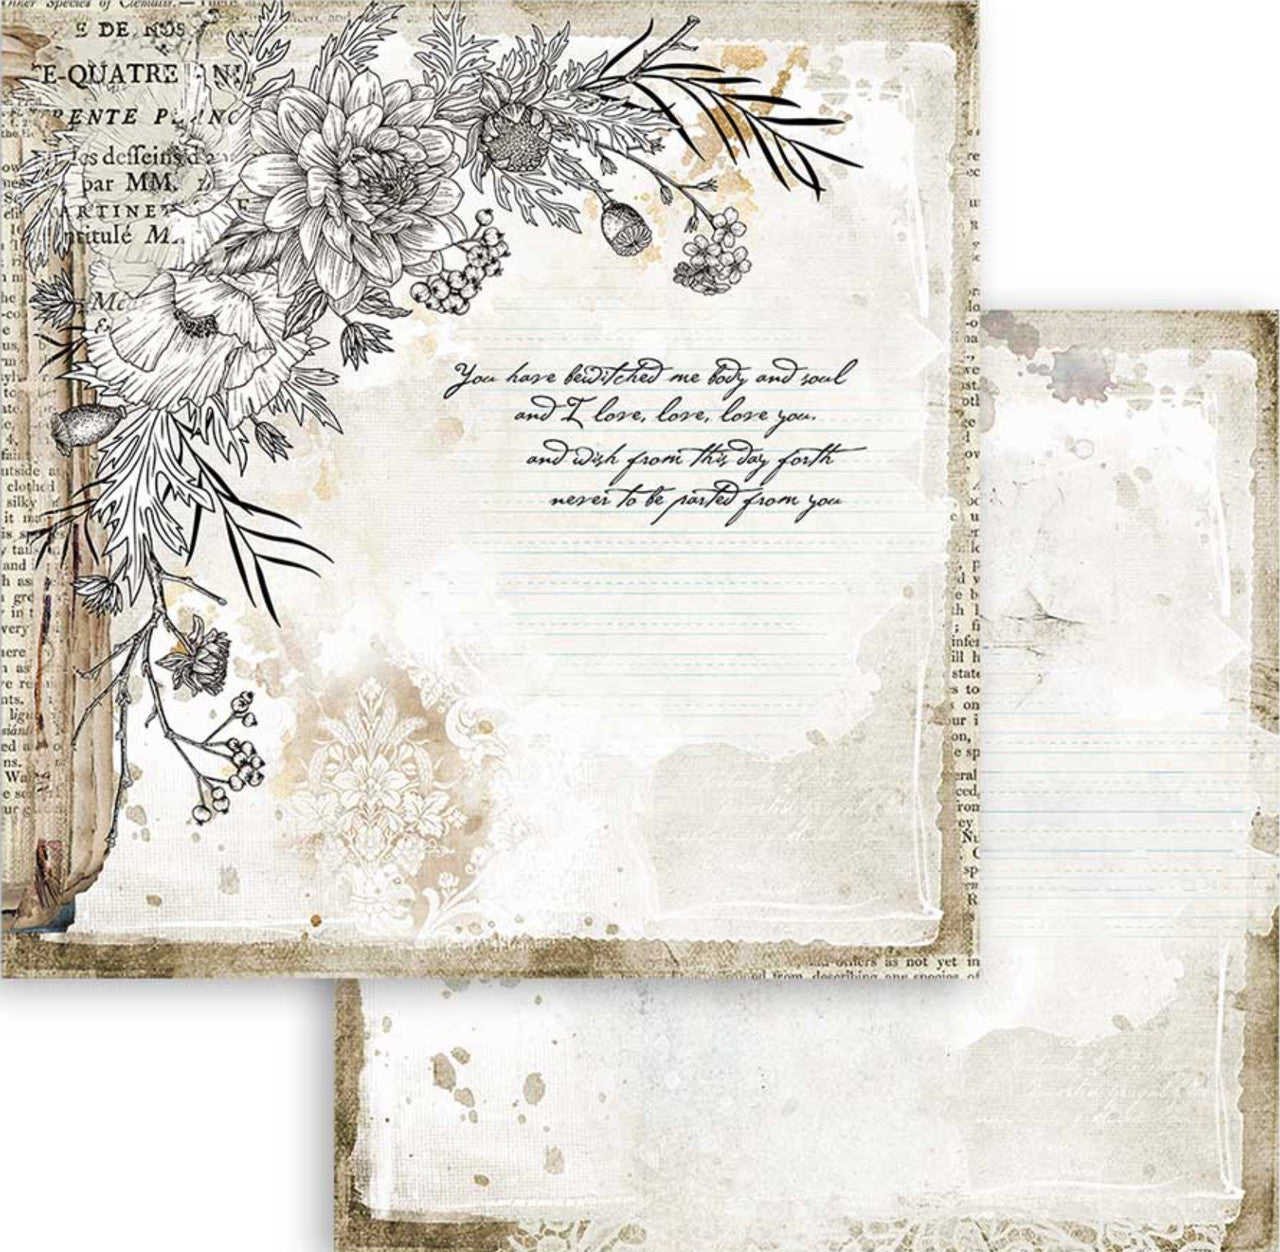 Stamperia Romantic Journal 12” x 12” Paper Collection